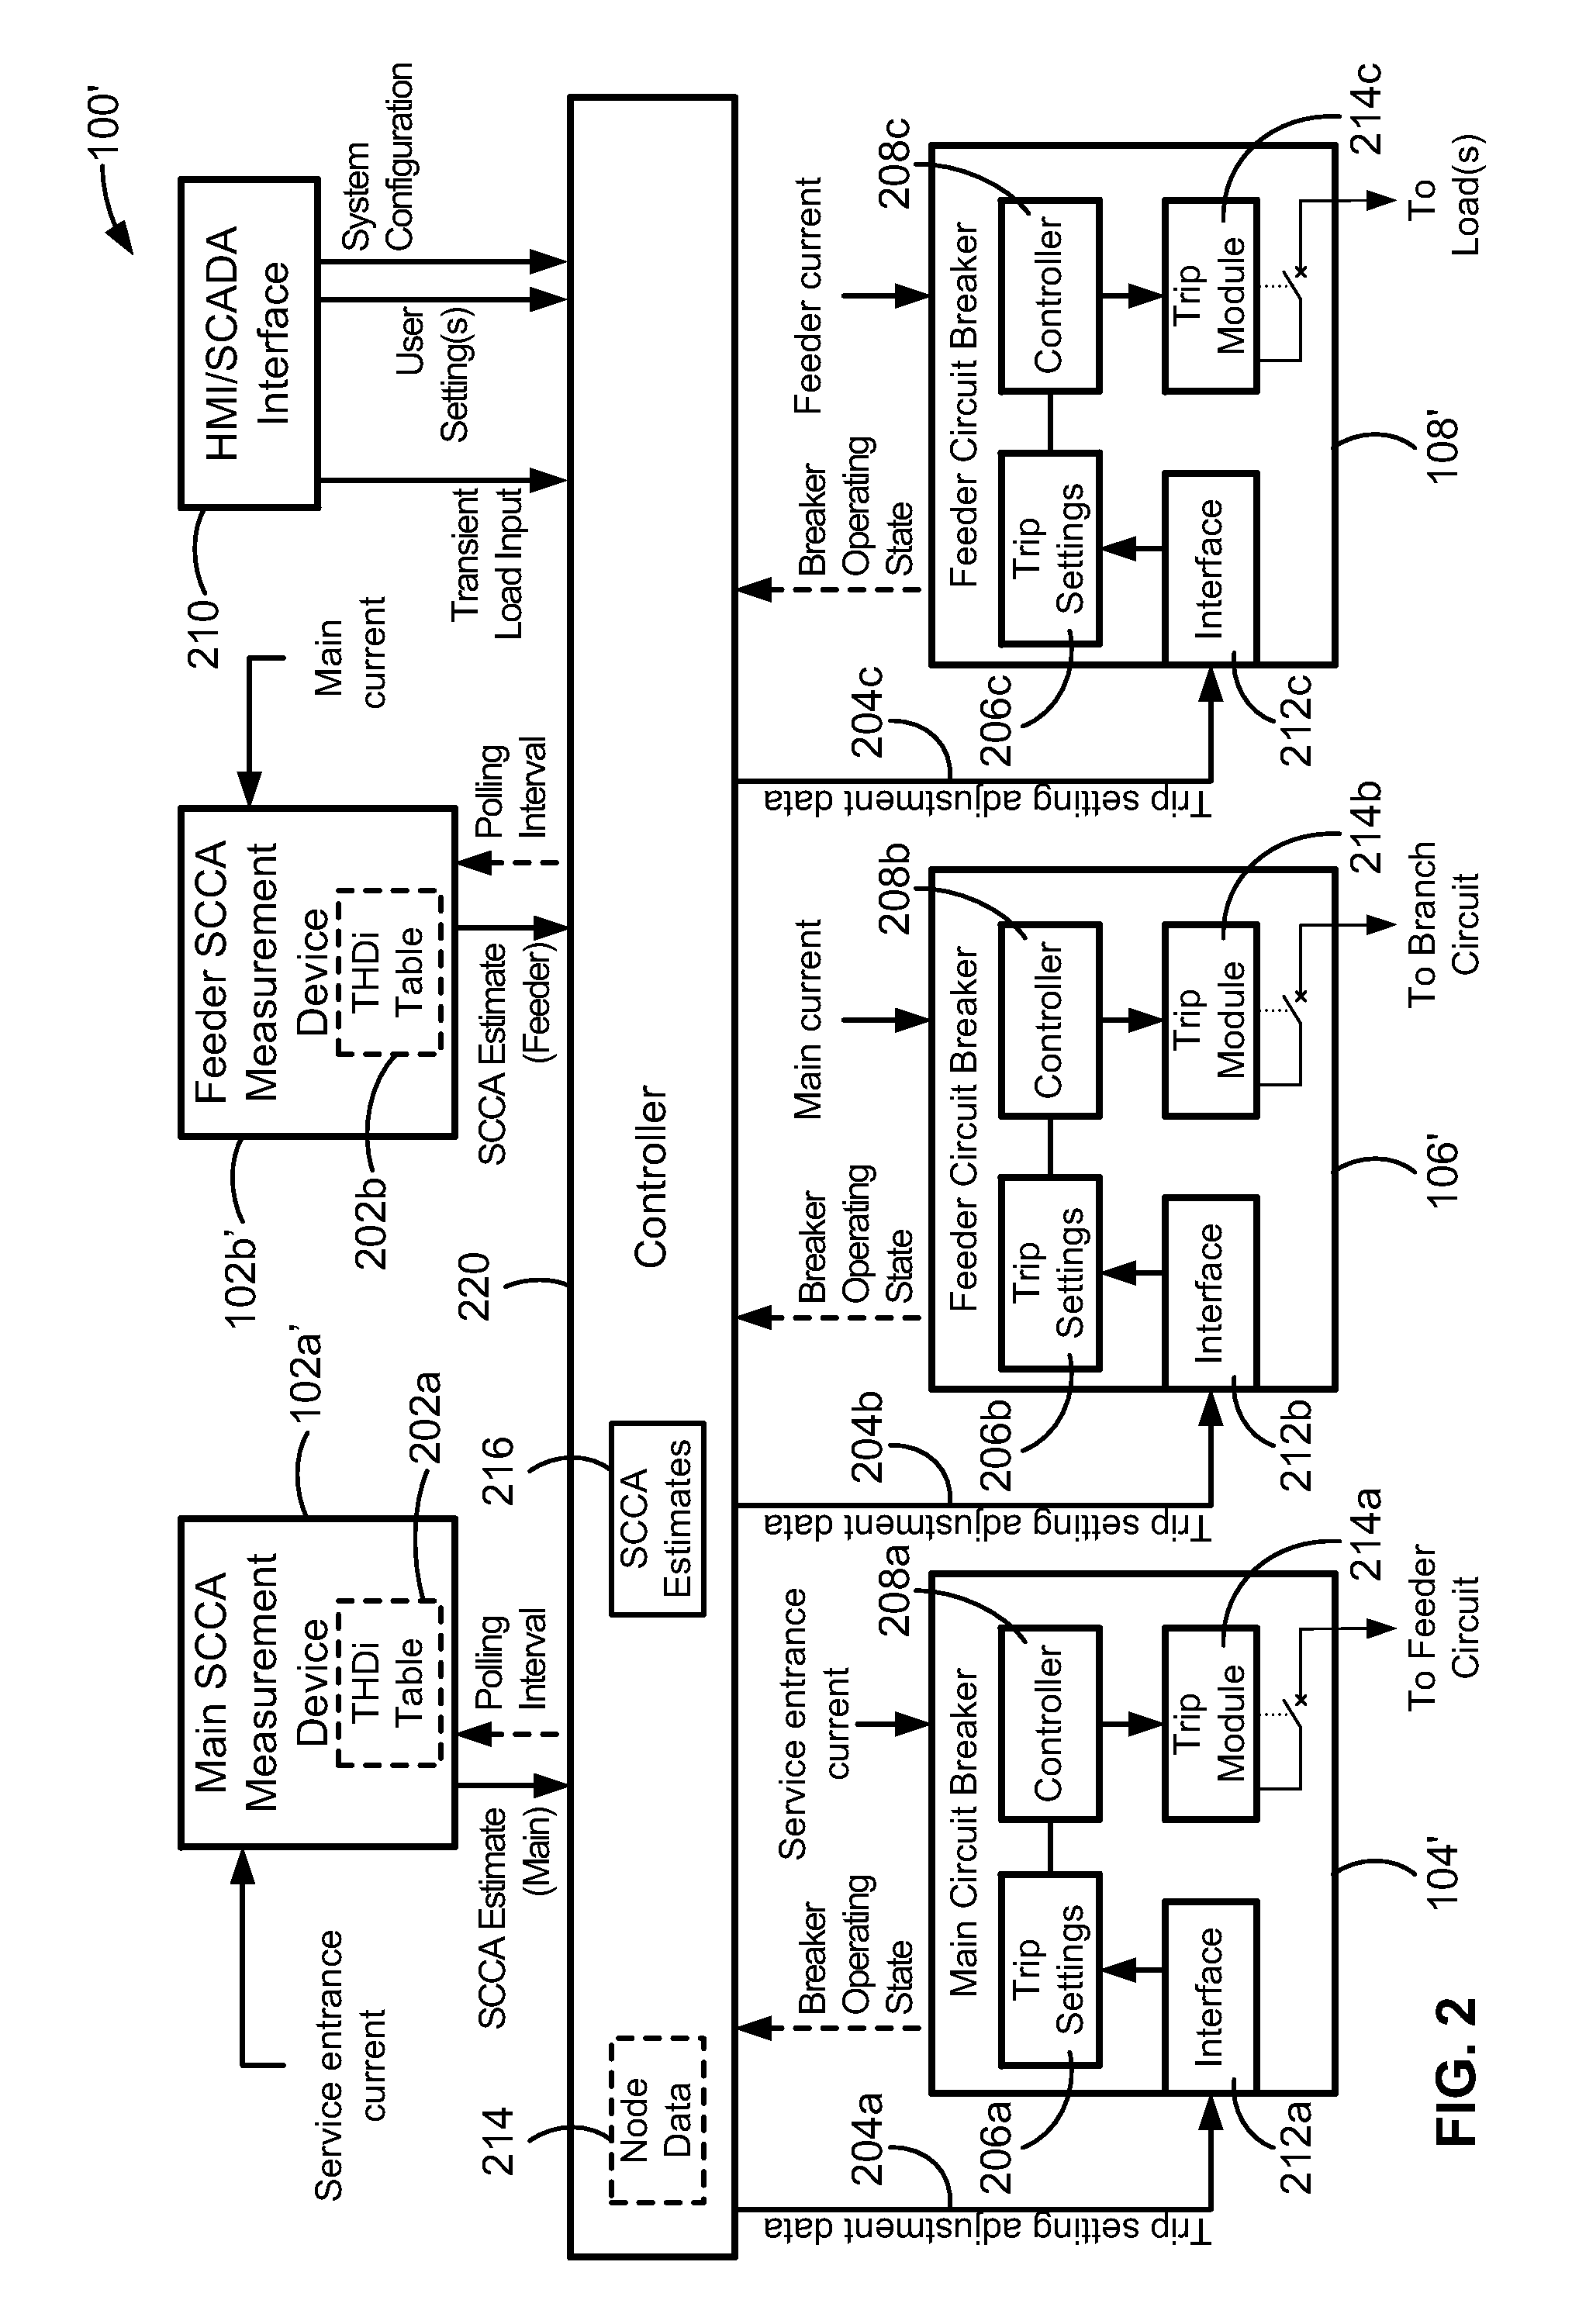 Optimized protection coordination of electronic-trip circuit breaker by short circuit current availability monitoring